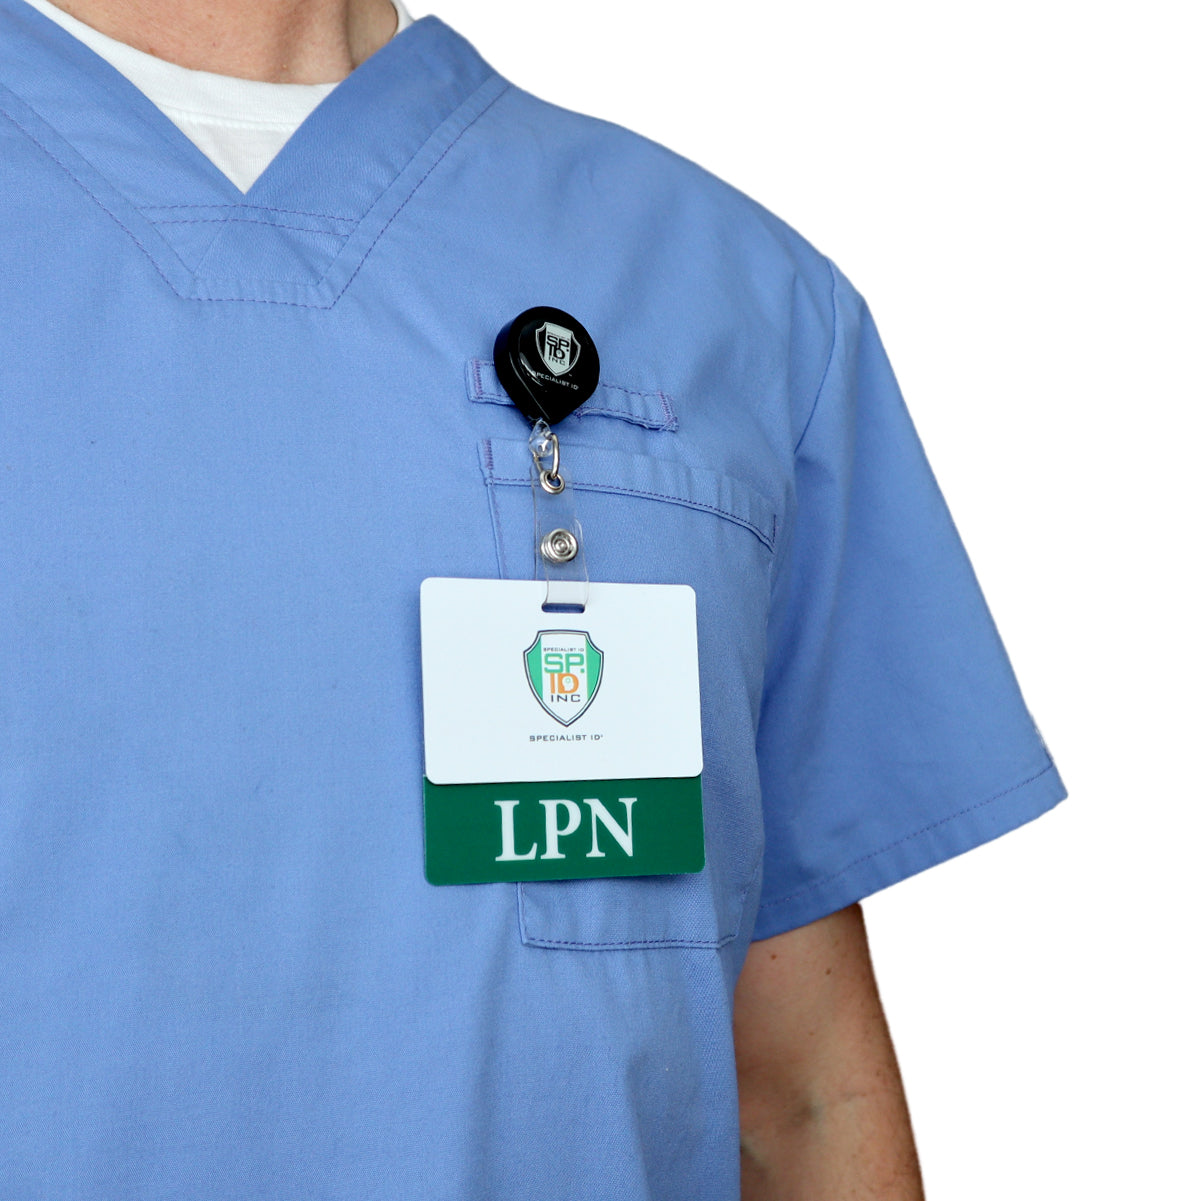 In a busy healthcare setting, a person wearing blue scrubs with a clear LPN Badge Buddy - Horizontal ID Badge Backer for Licensed Practical Nurses - Double Sided Print clipped to the chest pocket efficiently navigates their tasks.